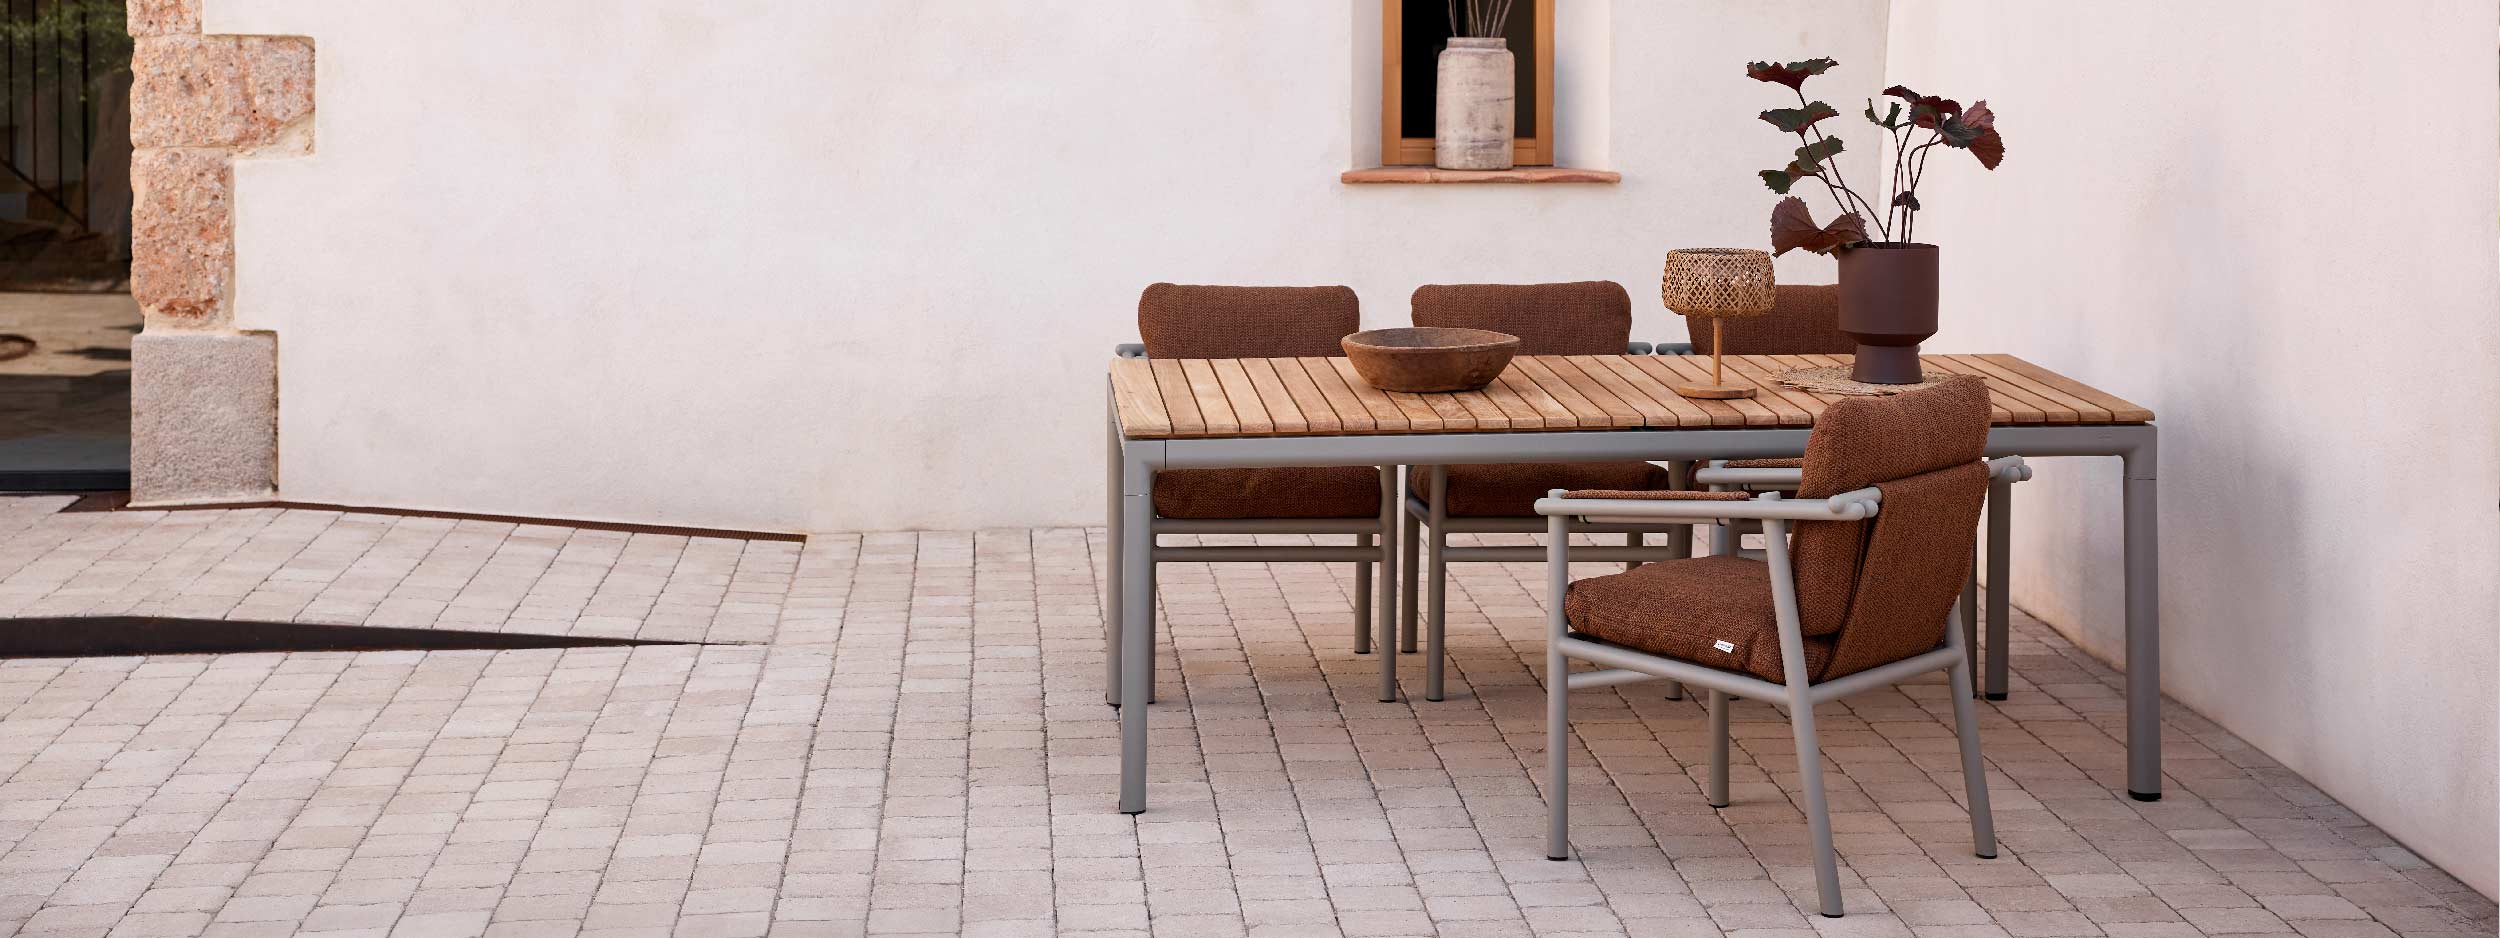 Image of Sticks taupe garden chairs with Umber-Brown cushions around Core taupe garden dining table with teak top